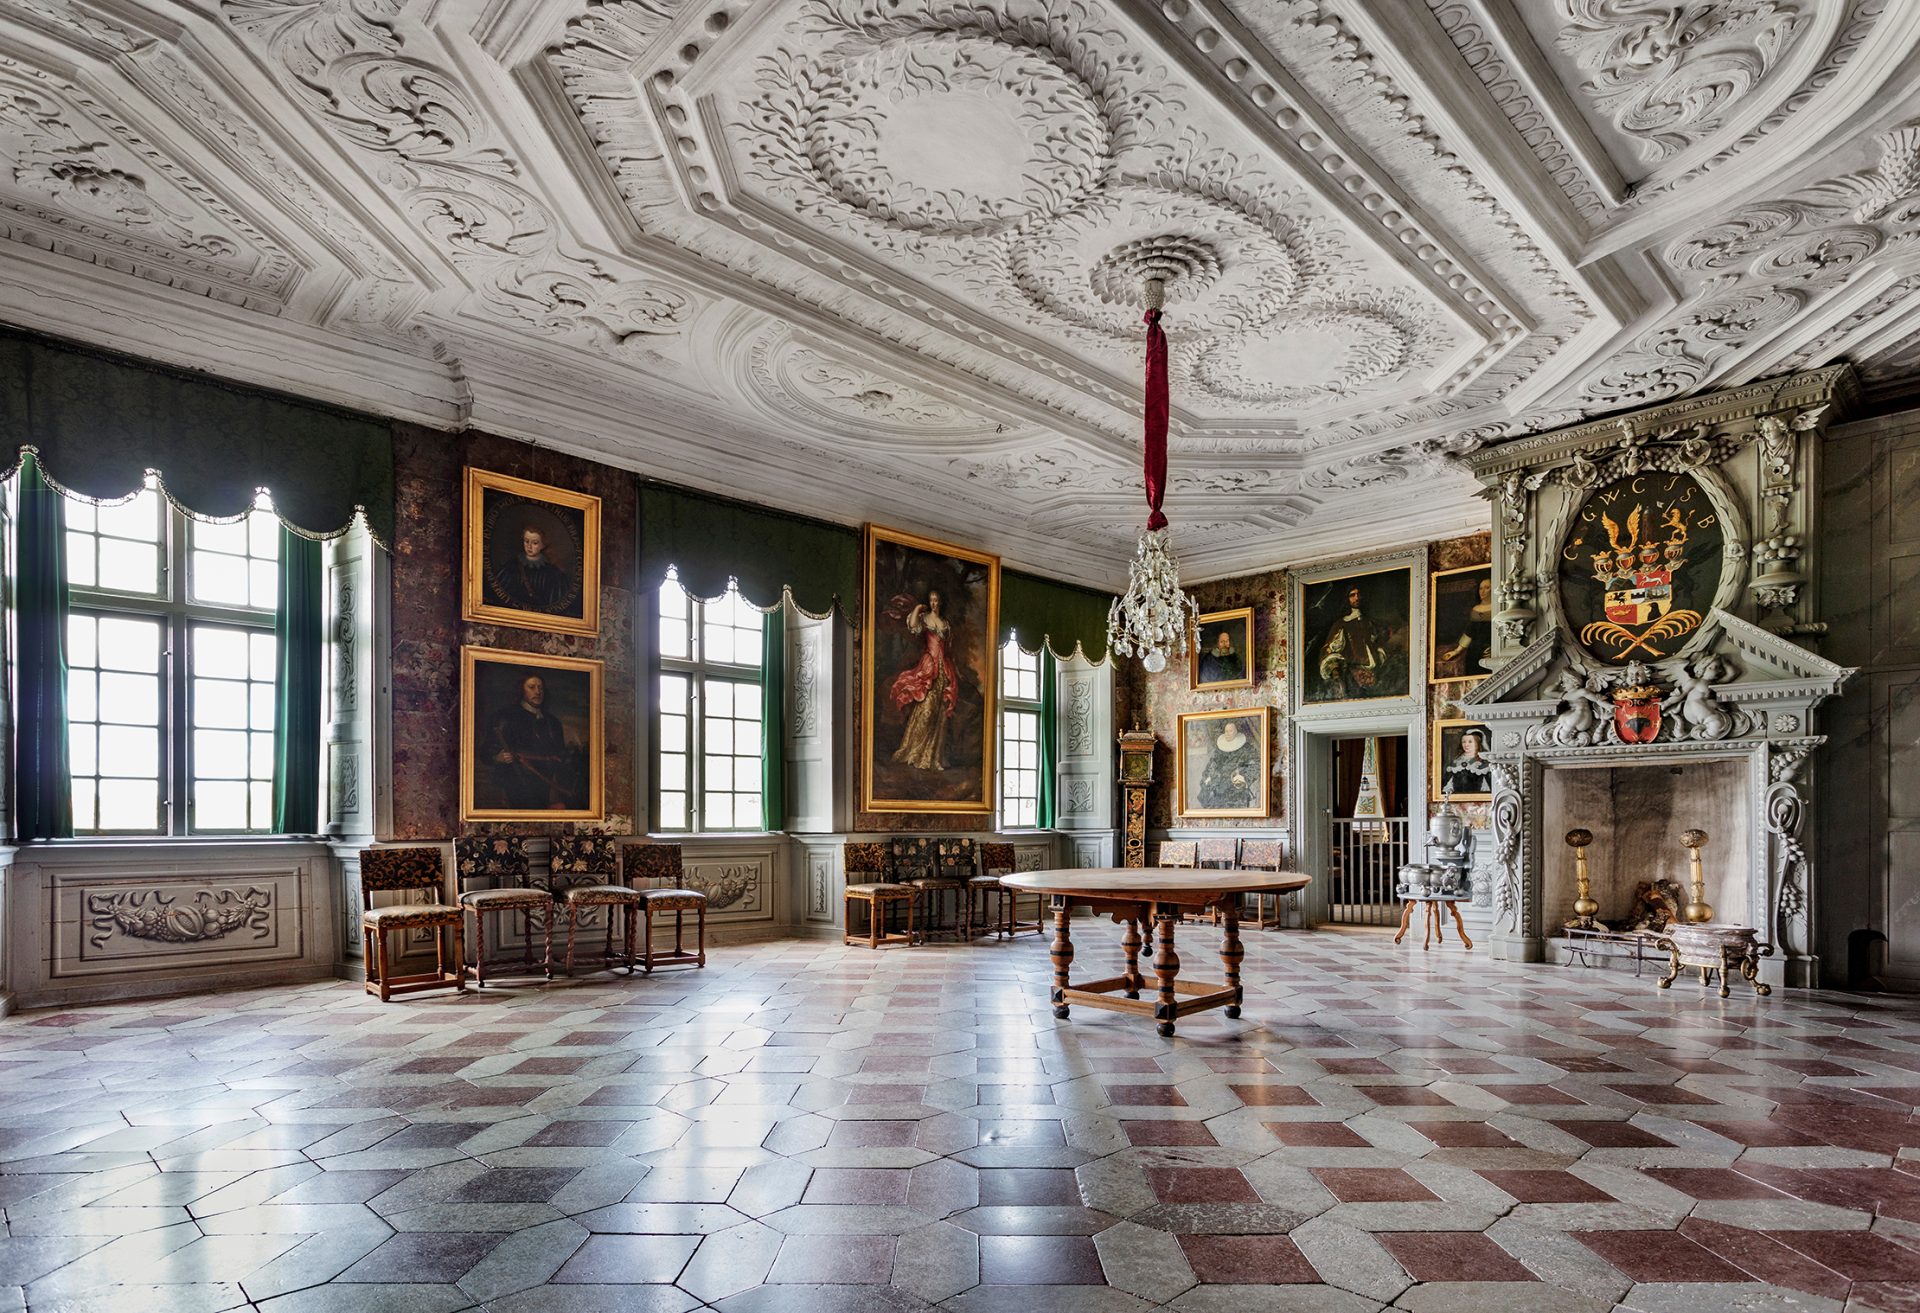 A very large room with patterned flagstone floor, lavishly decorated fireplace and several paintings.